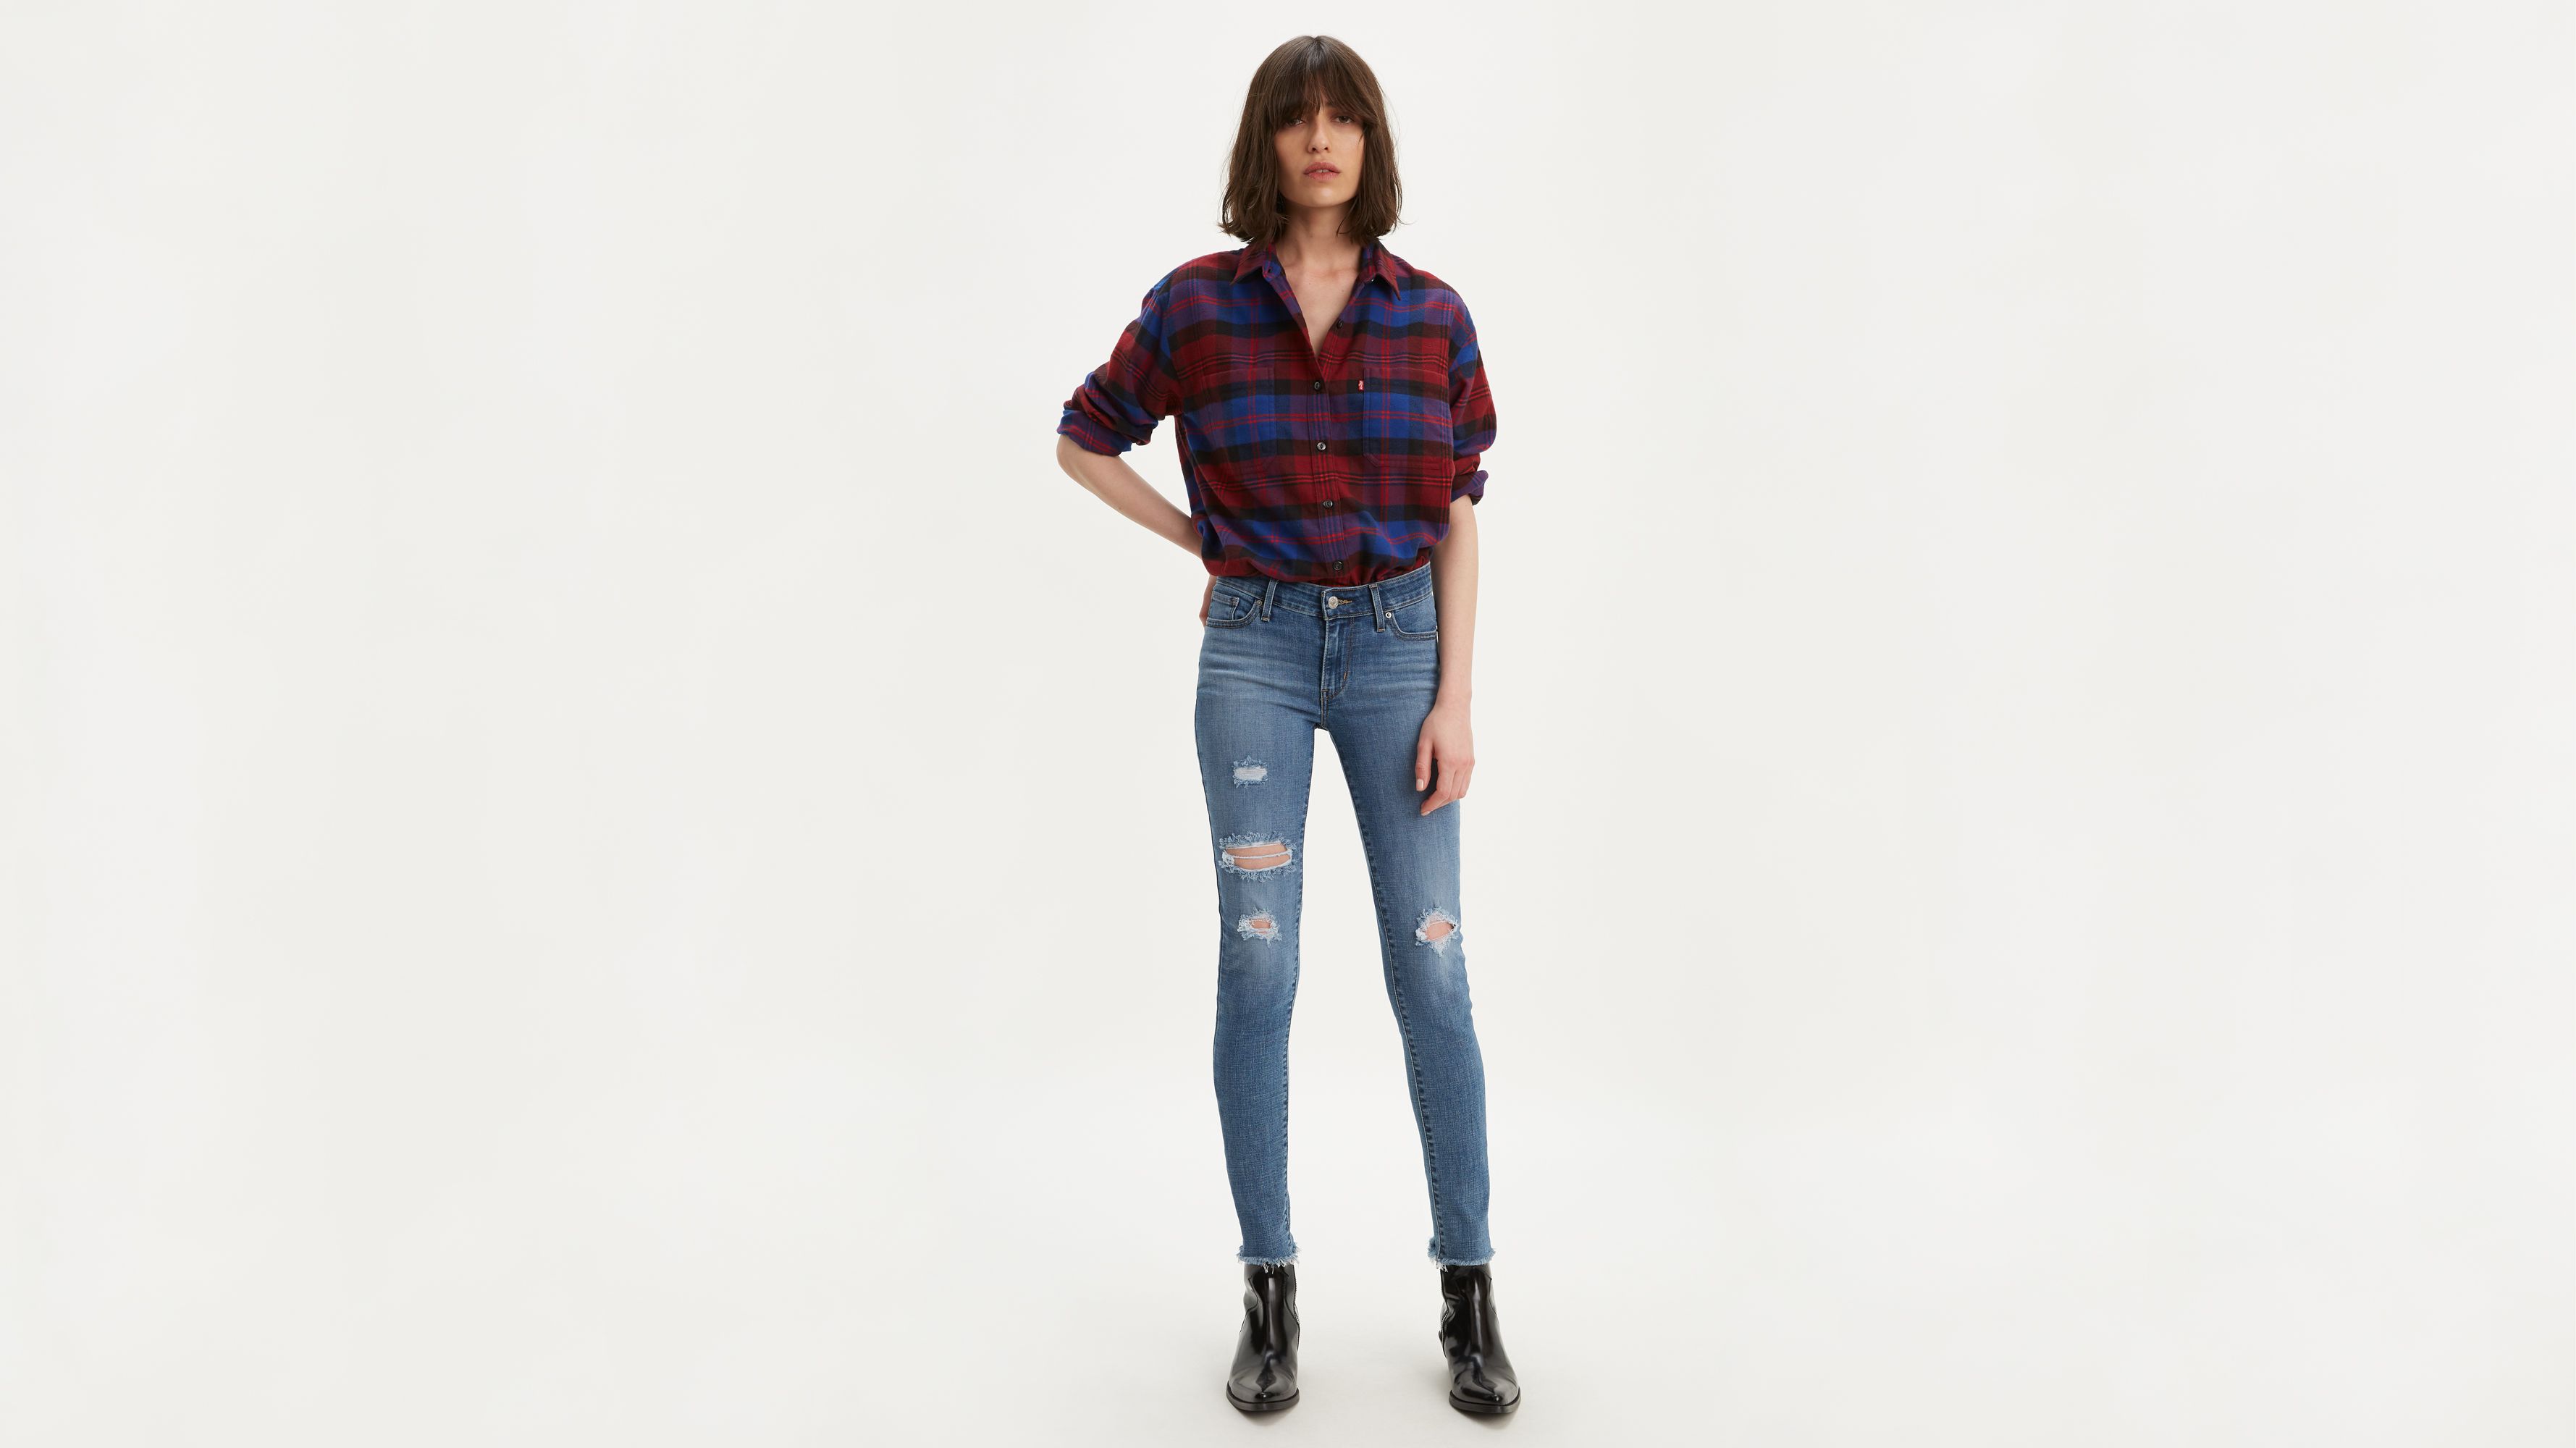 distressed levis womens